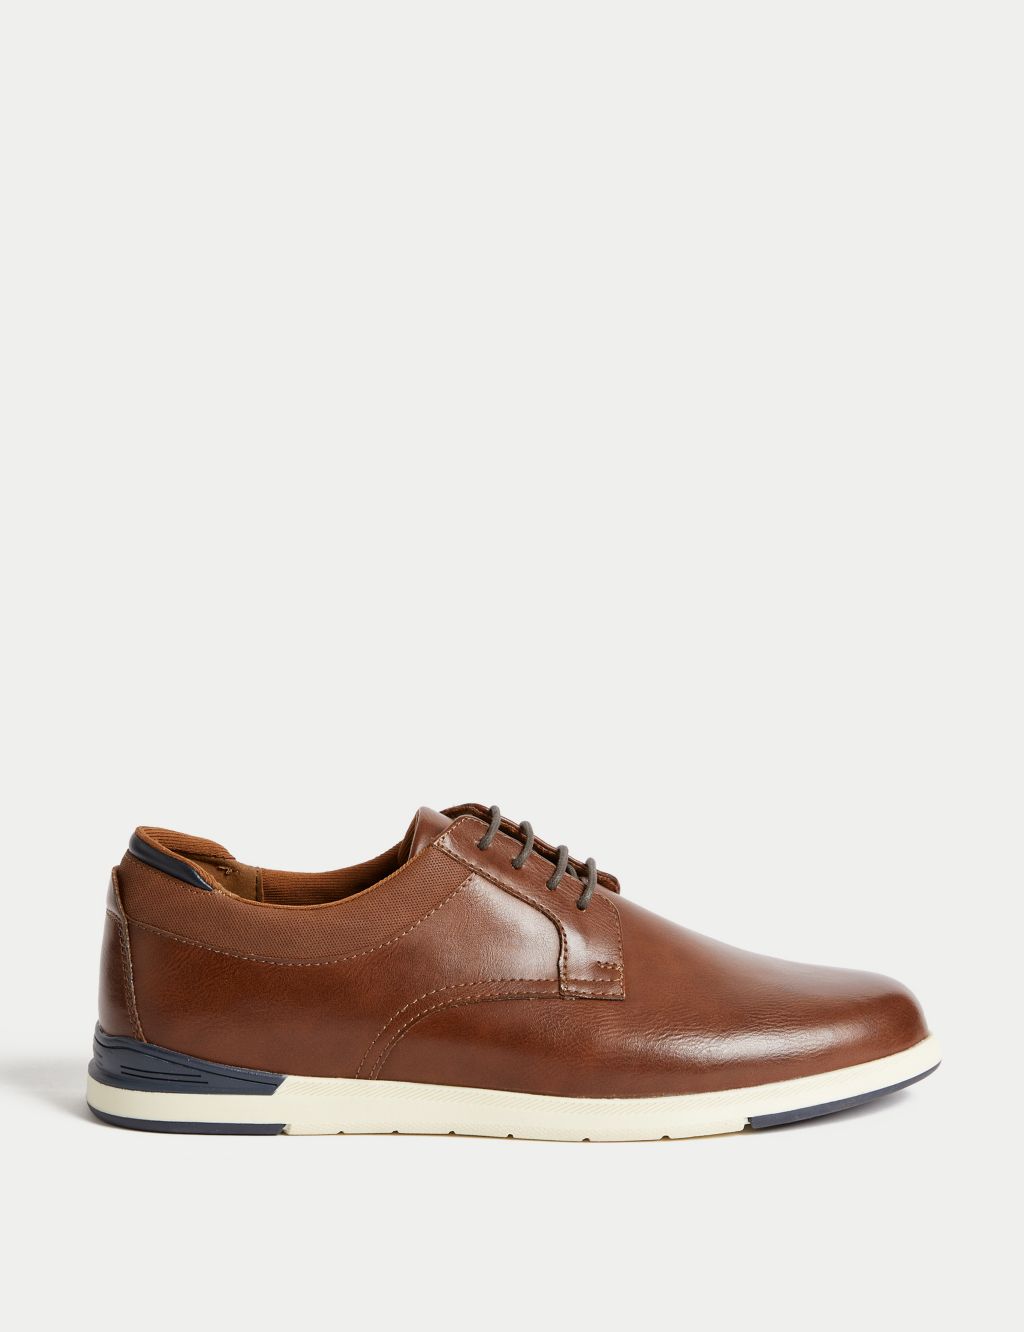 Shop Casual Shoes for Men at M&S